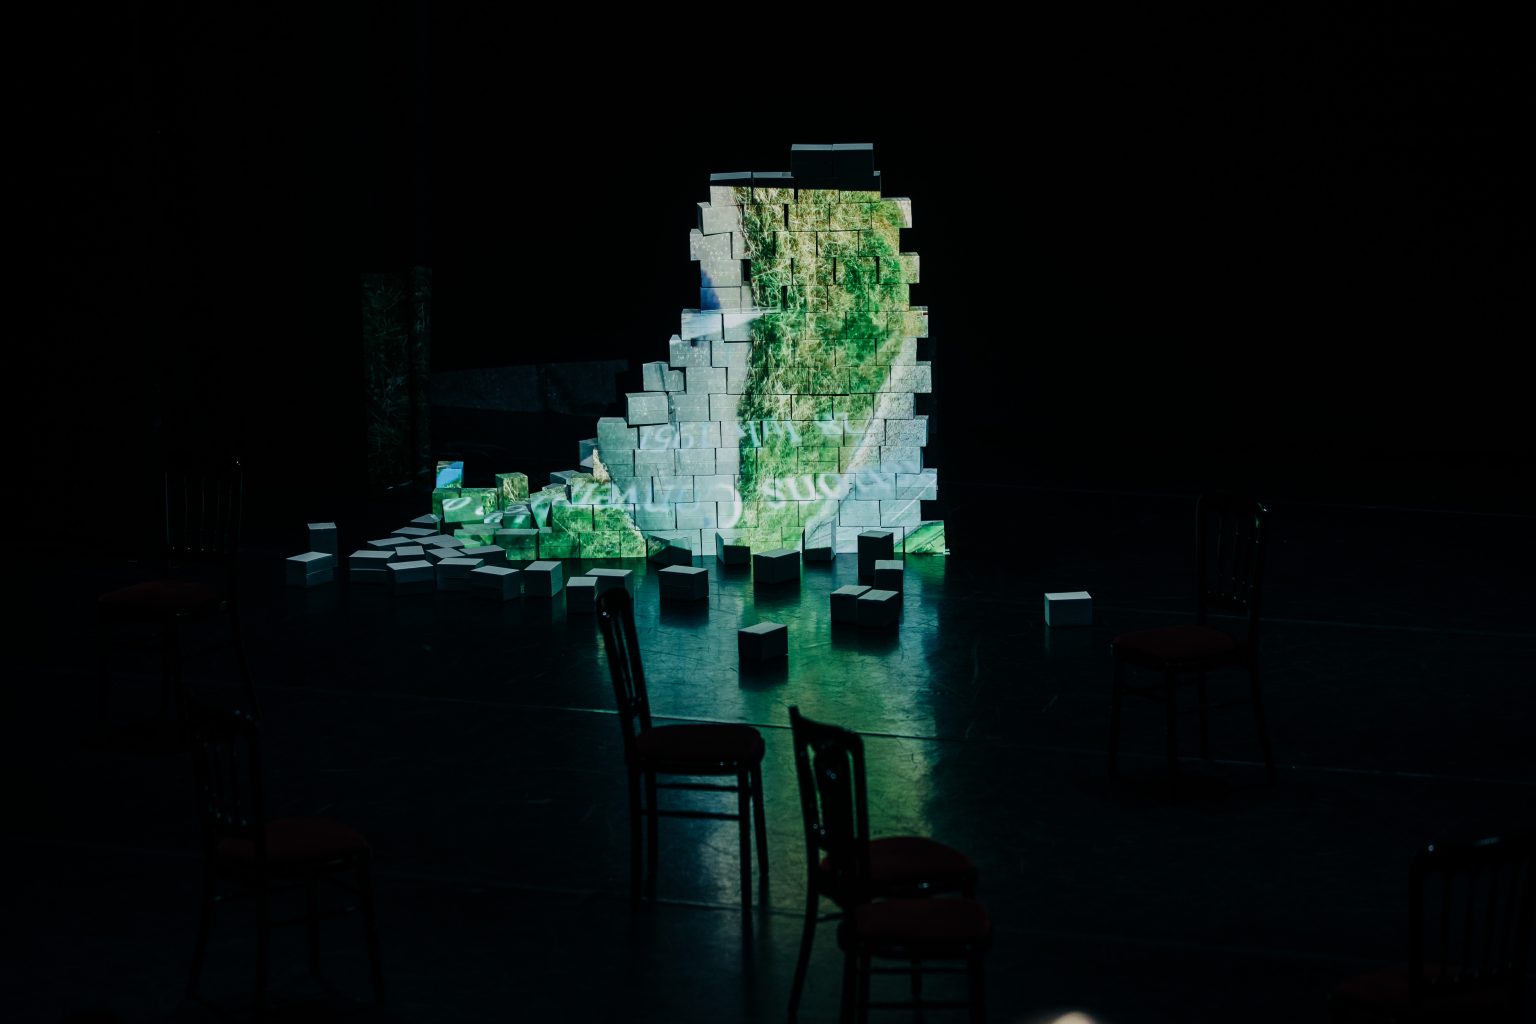 A half built and half demolished brick wall on a dark stage. There is an undiscernible image projected onto the wall.